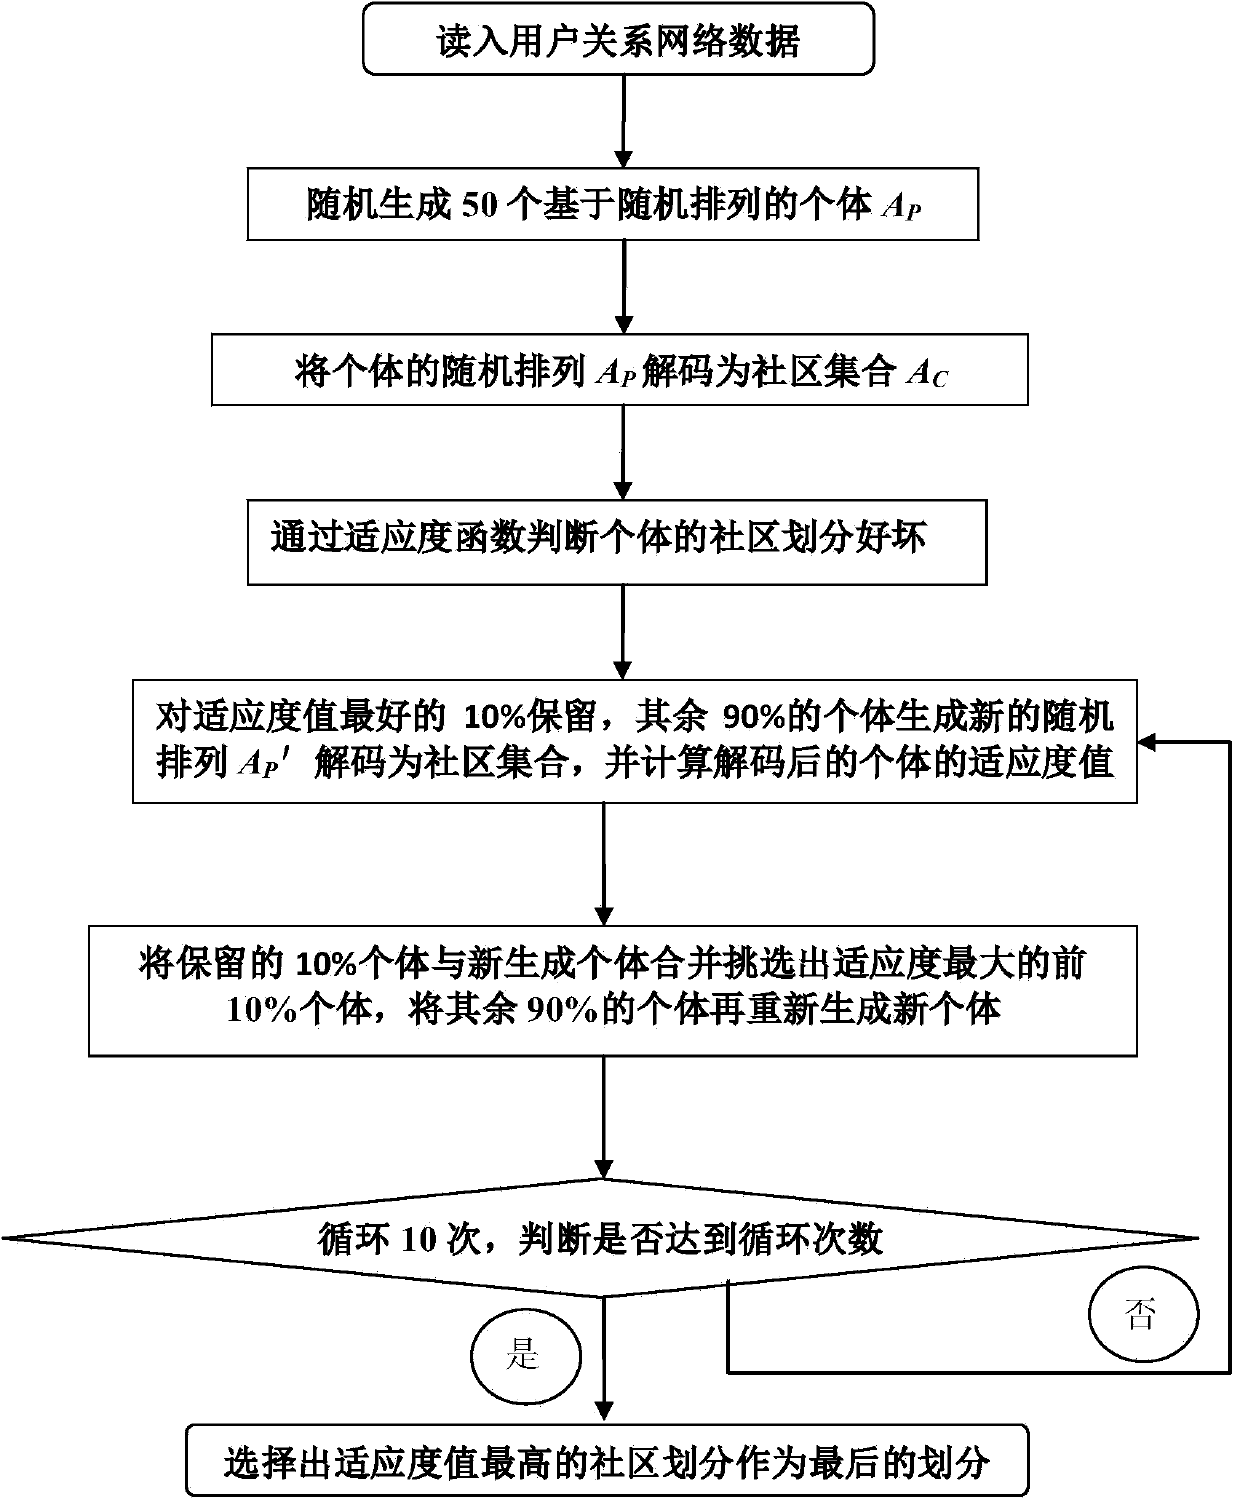 Network community based collaborative filtering recommendation method